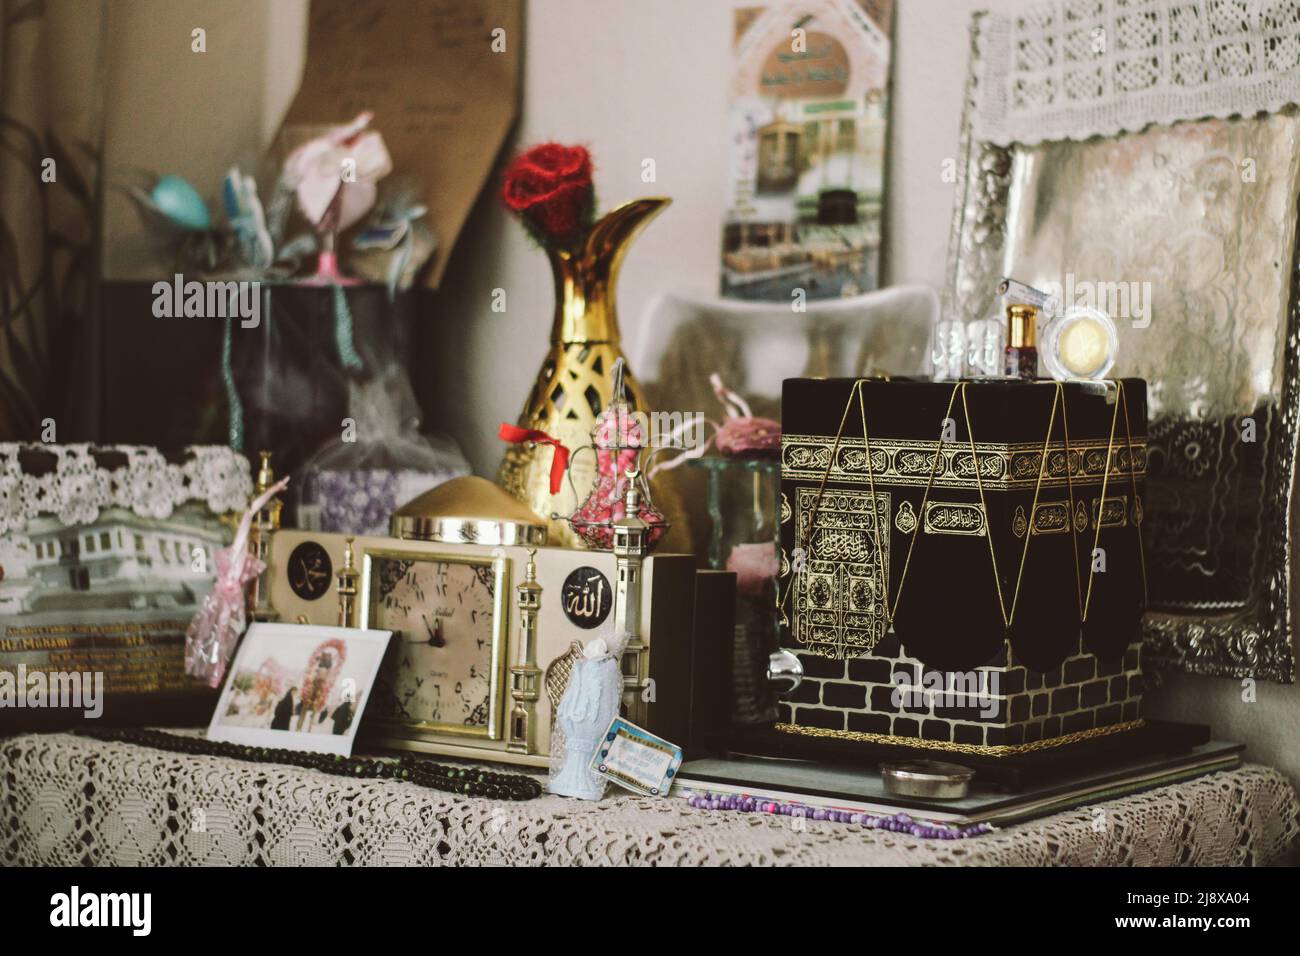 Islamic objects on the table Stock Photo